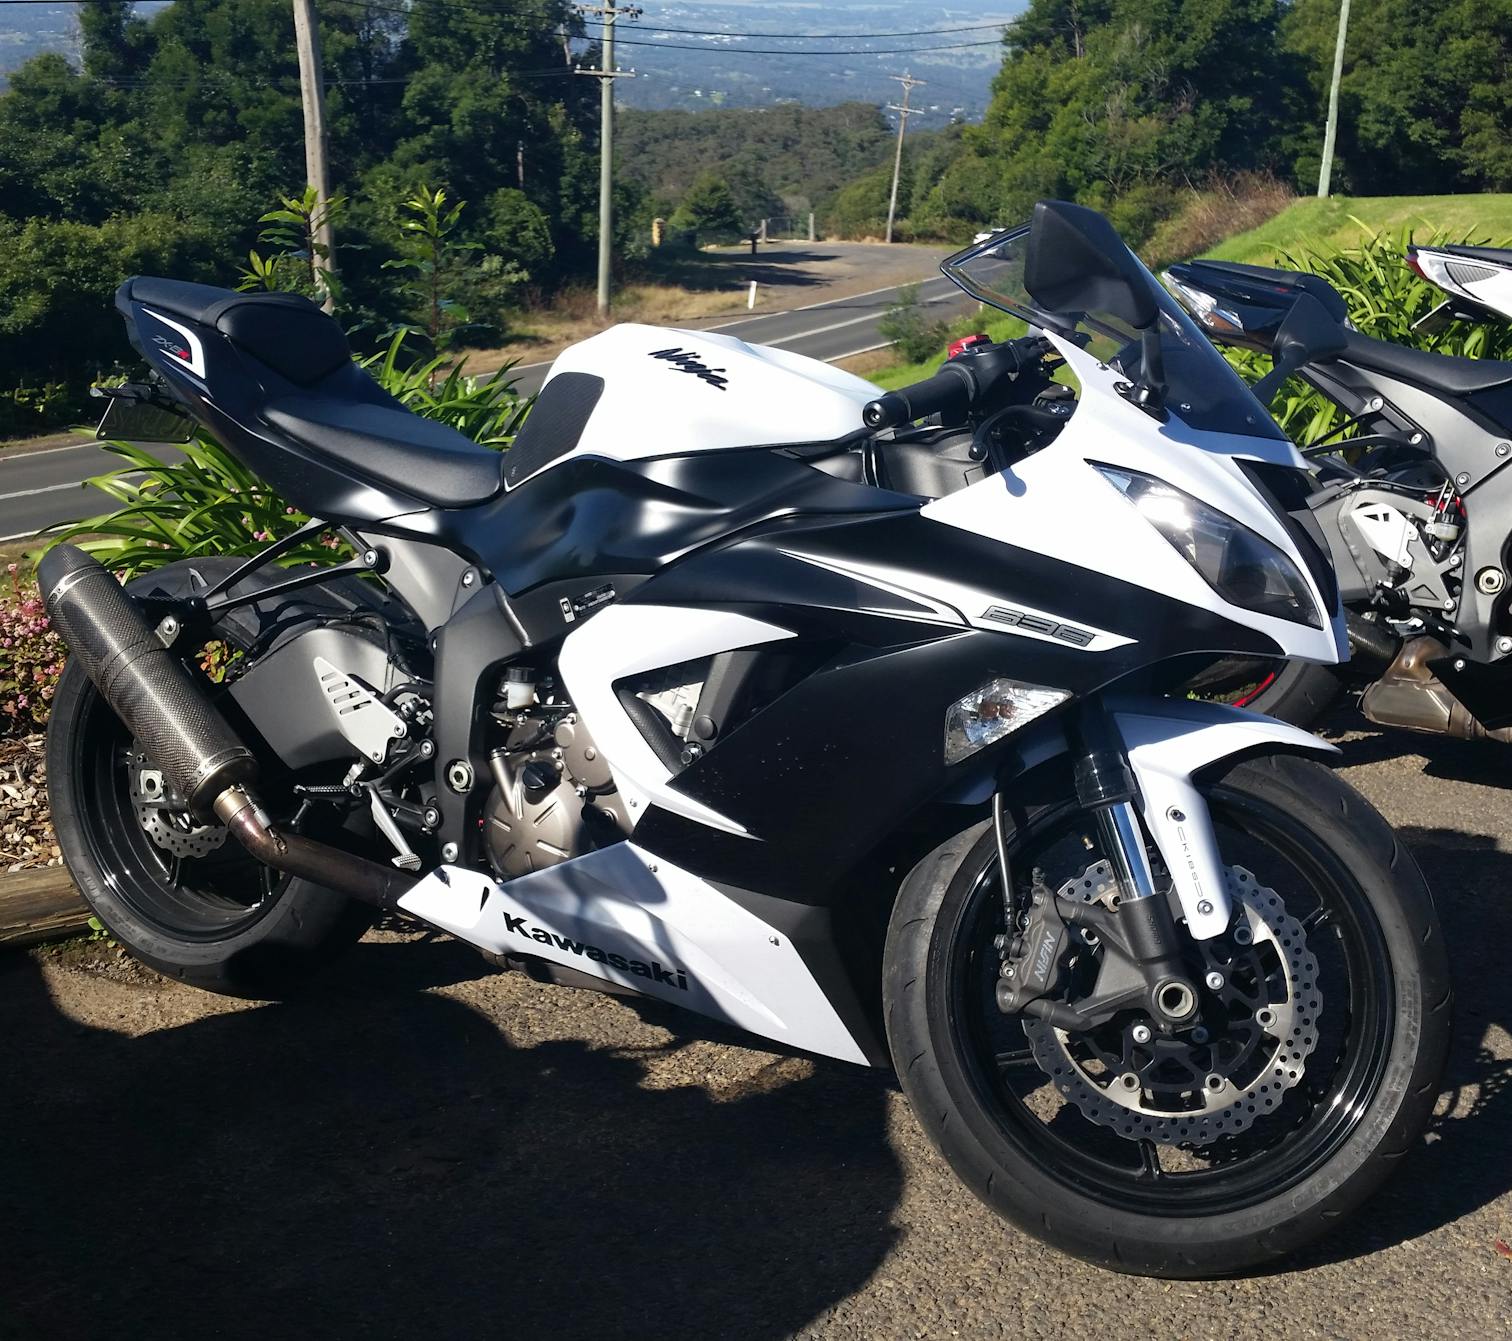 A white Zx636 motorcycle with an Akrapovic slip on exhaust